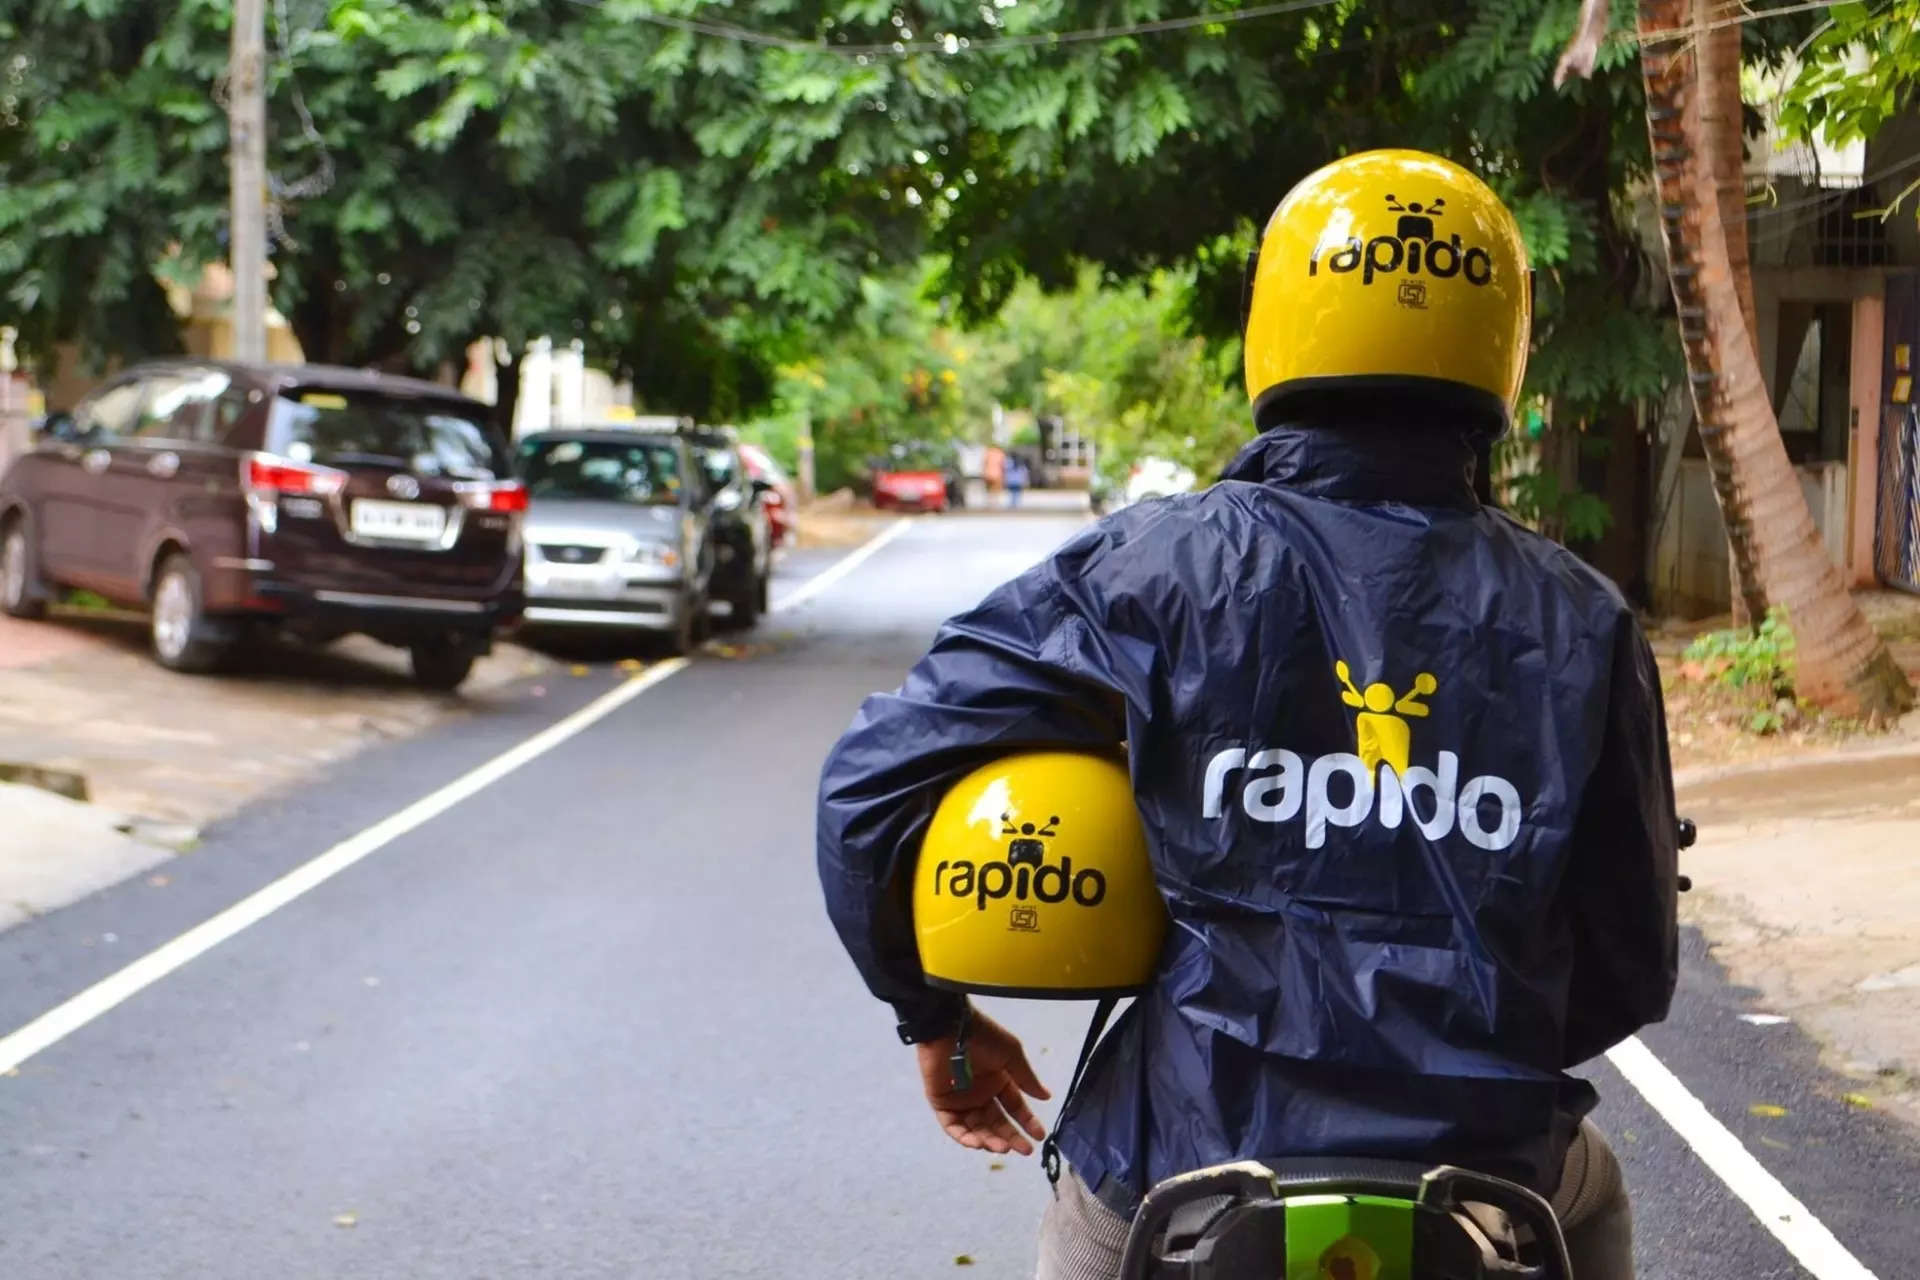 Rapido commitment to boosting voter